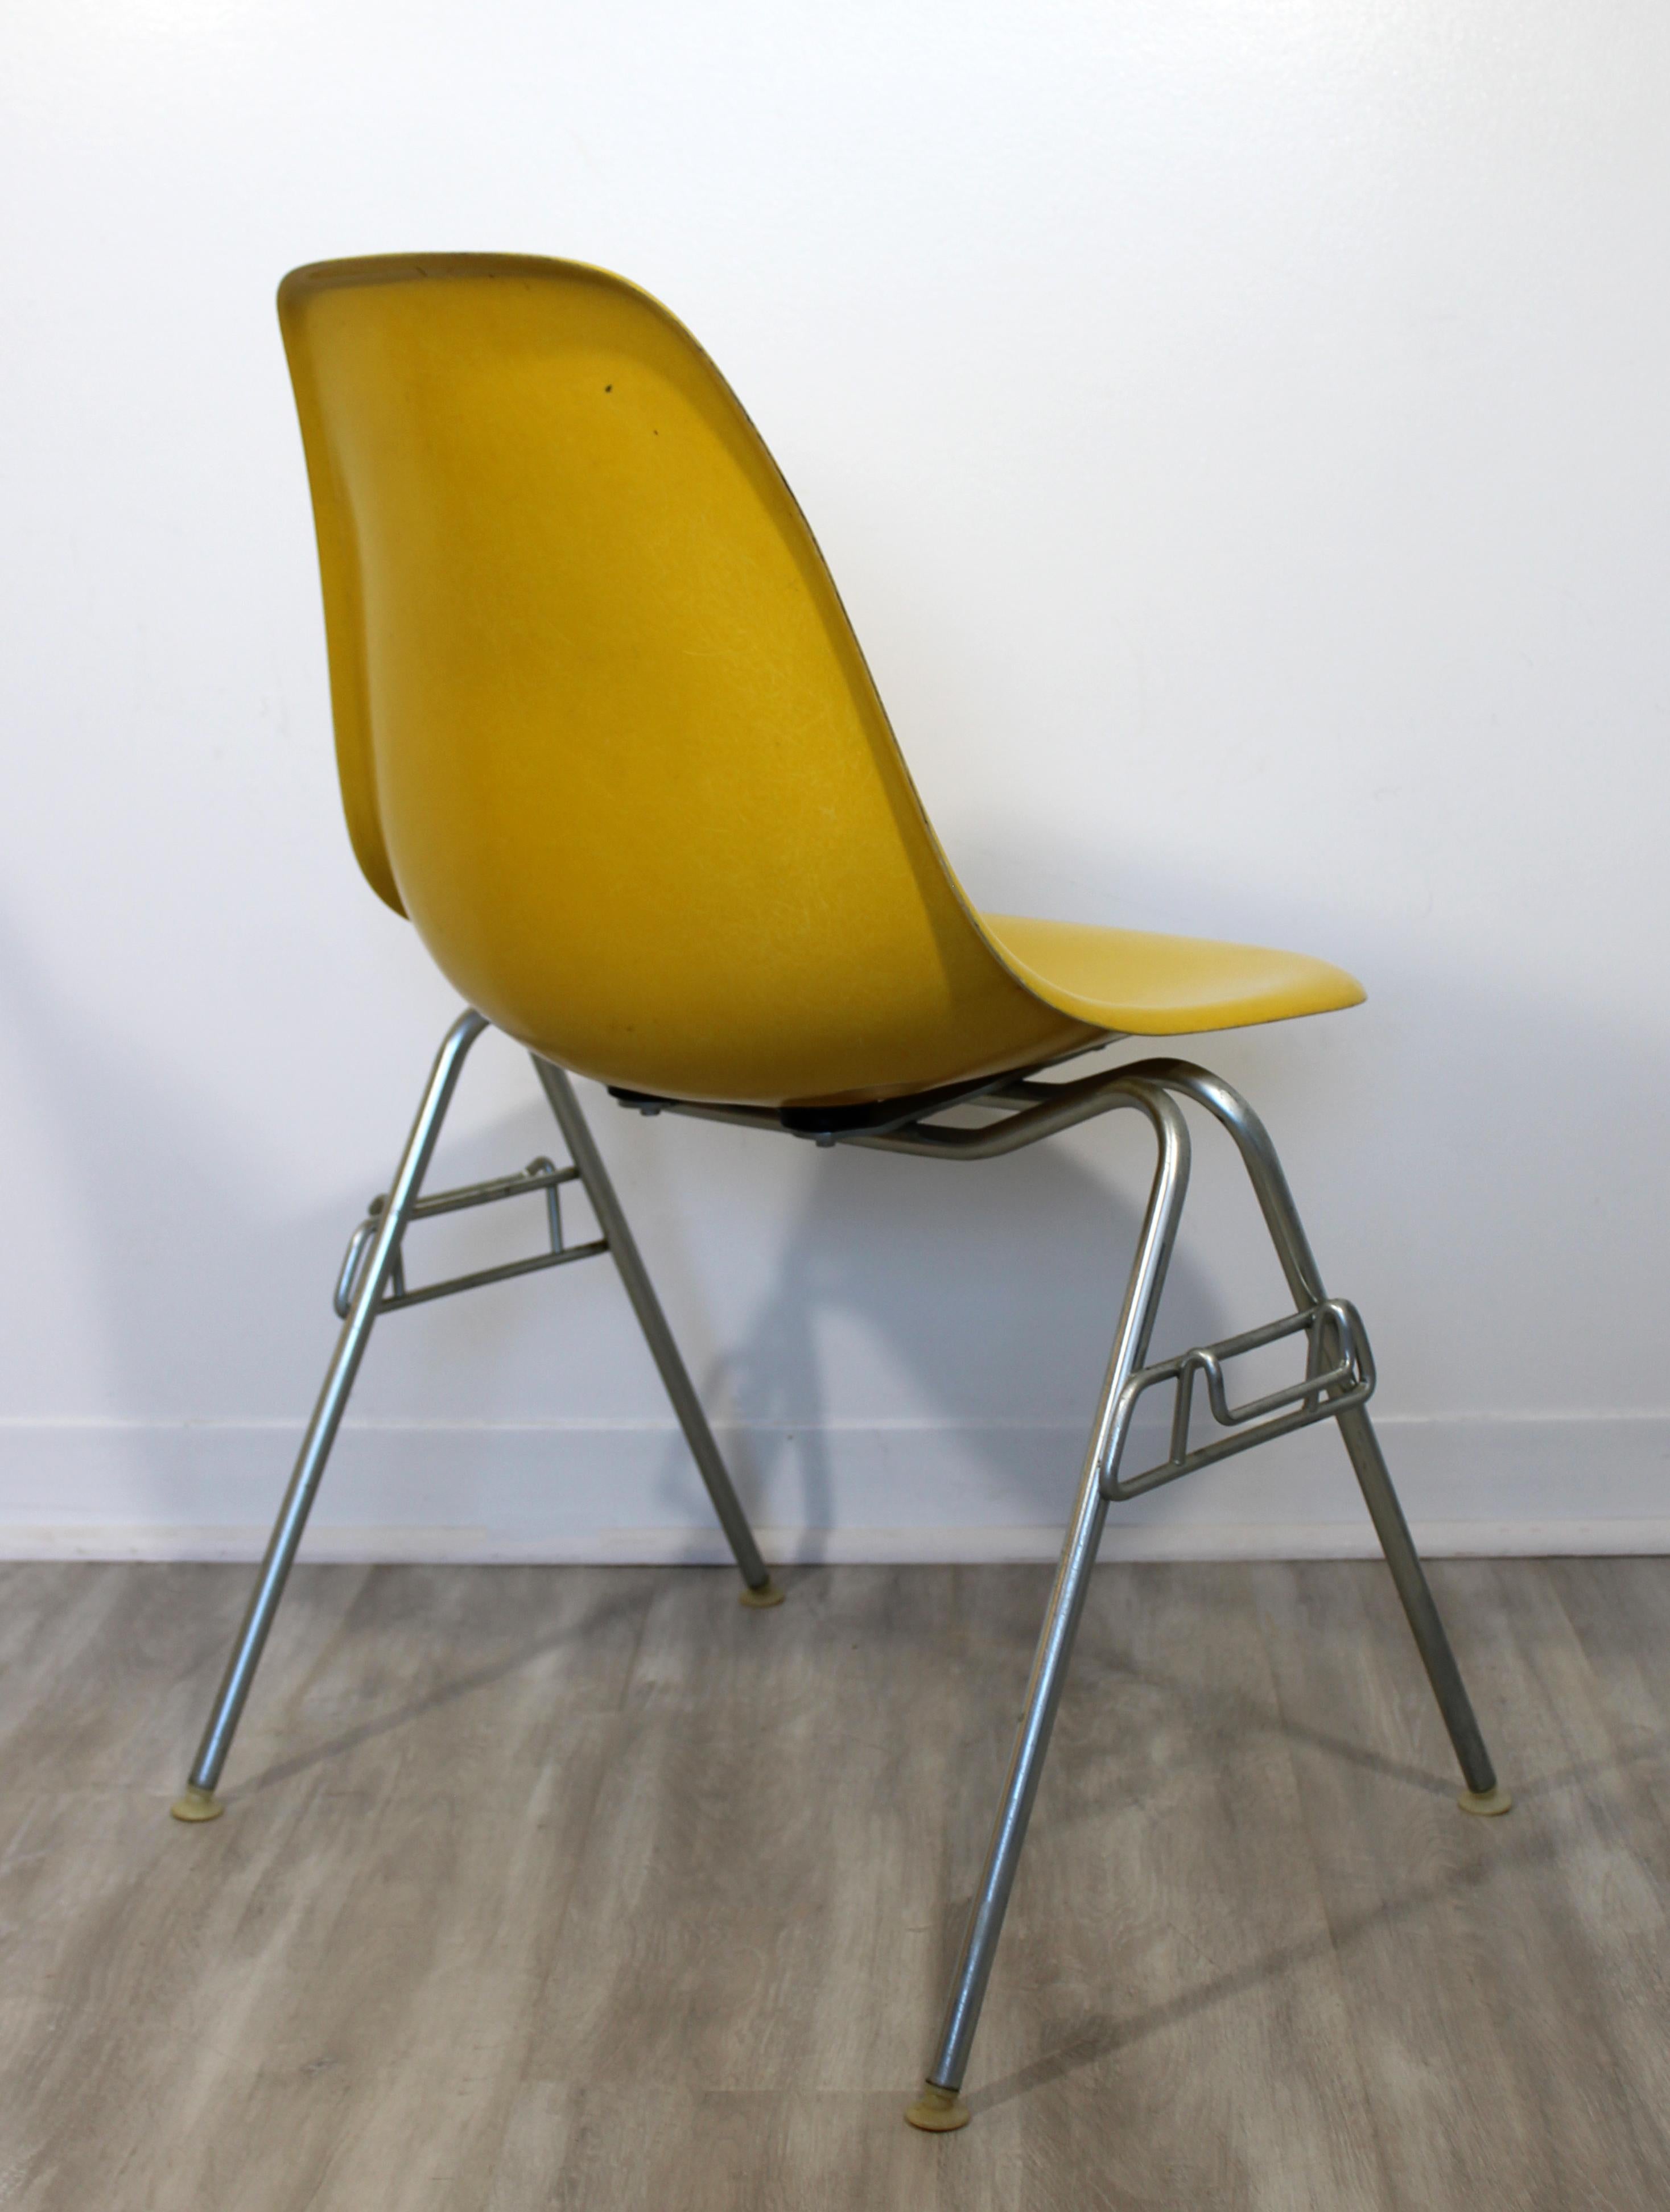 American Mid-Century Modern Herman Miller Set of 4 Yellow Shell Stacking Side Chairs